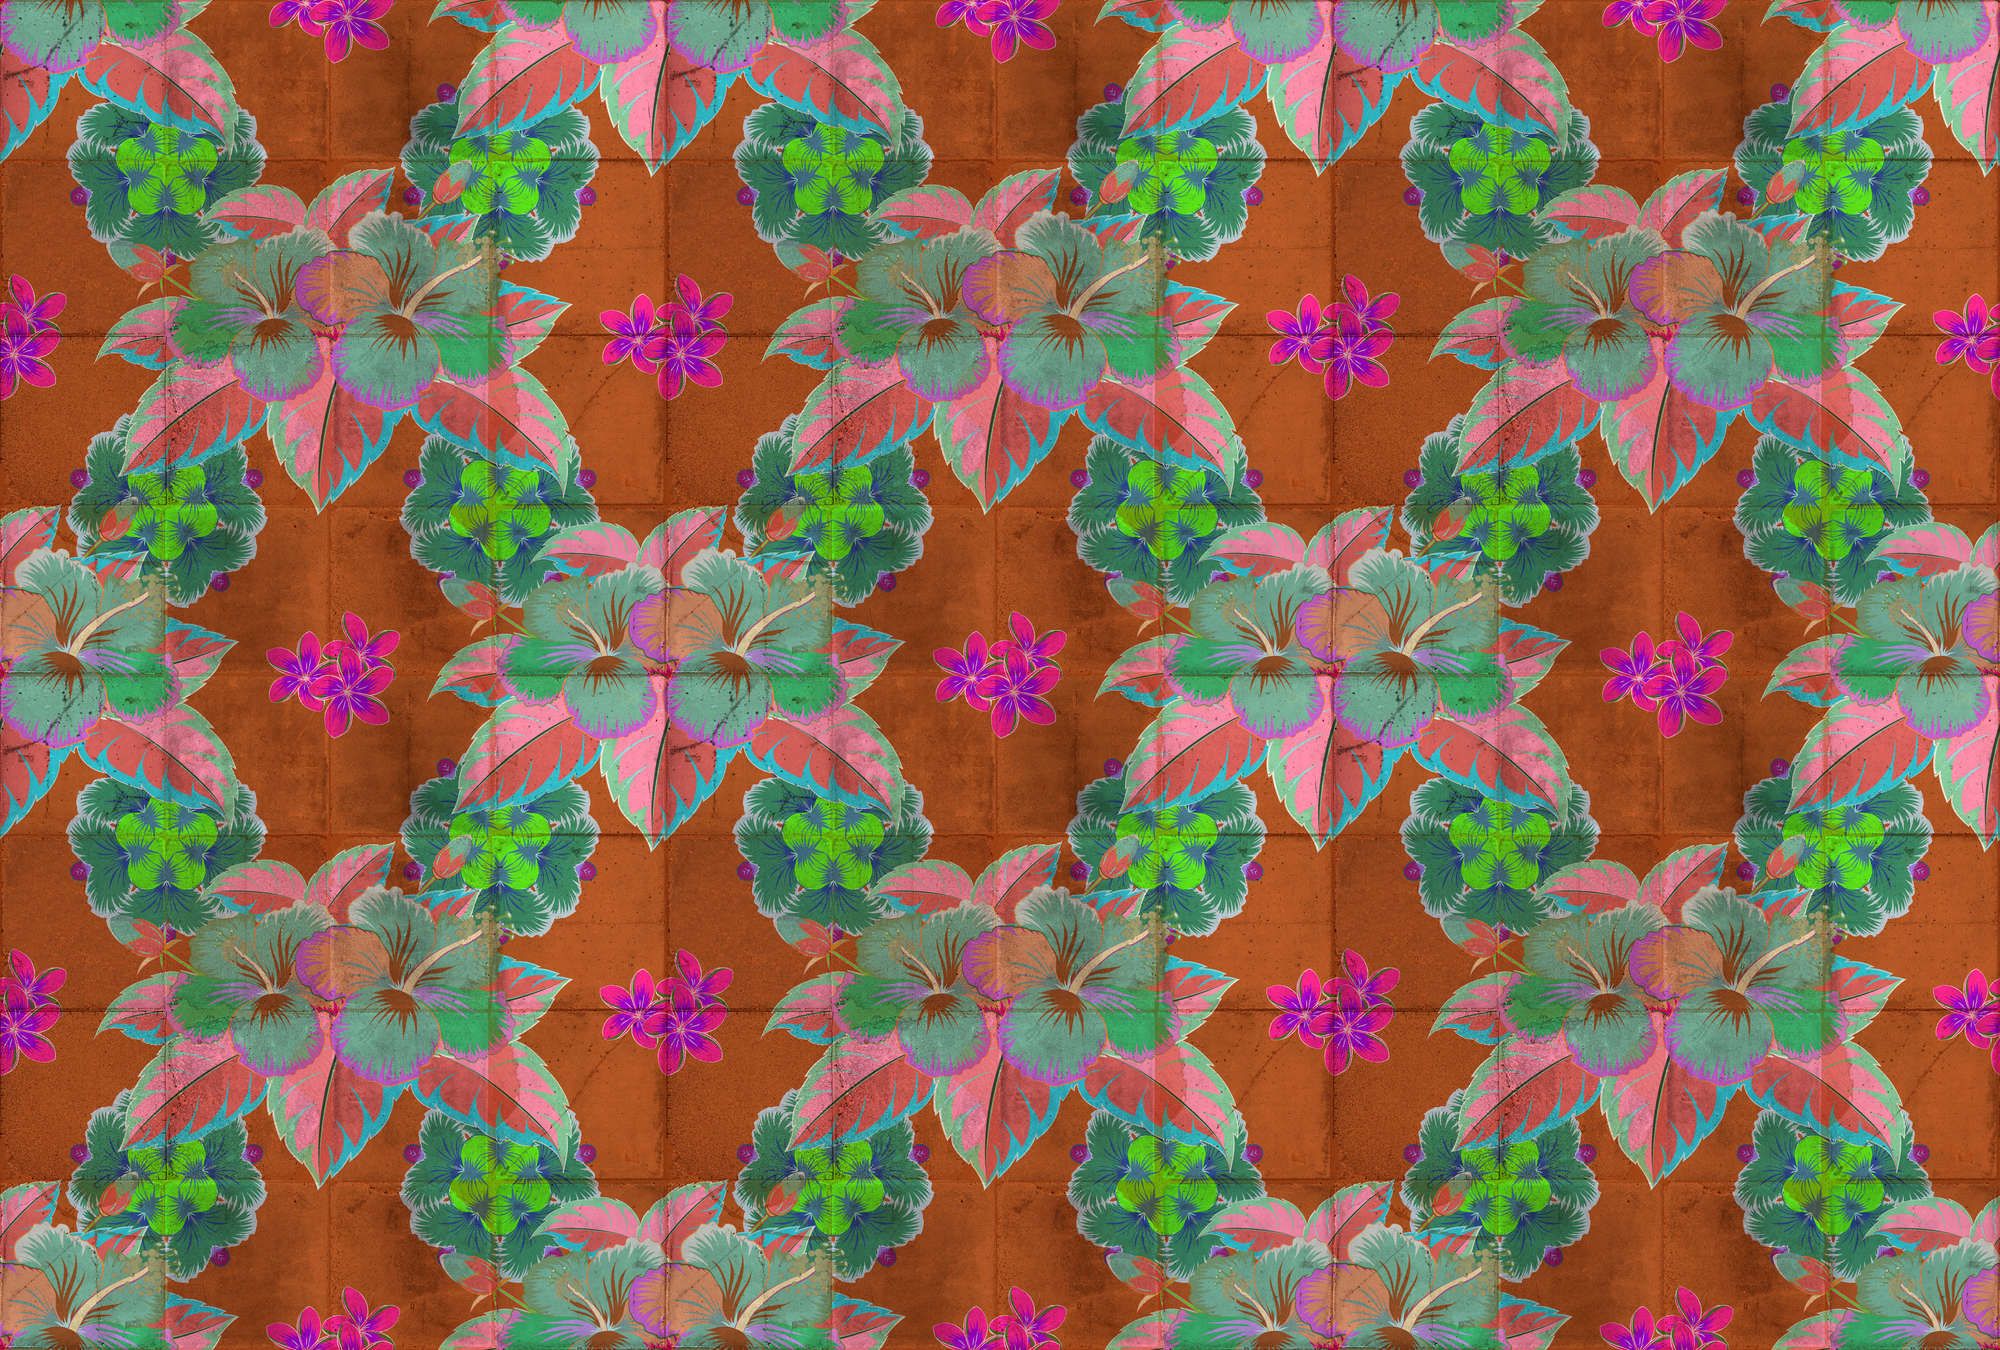             Photo wallpaper »pierre« - Leaf design with kaleidoscope effect on concrete tile structure - Smooth, slightly shiny premium non-woven fabric
        